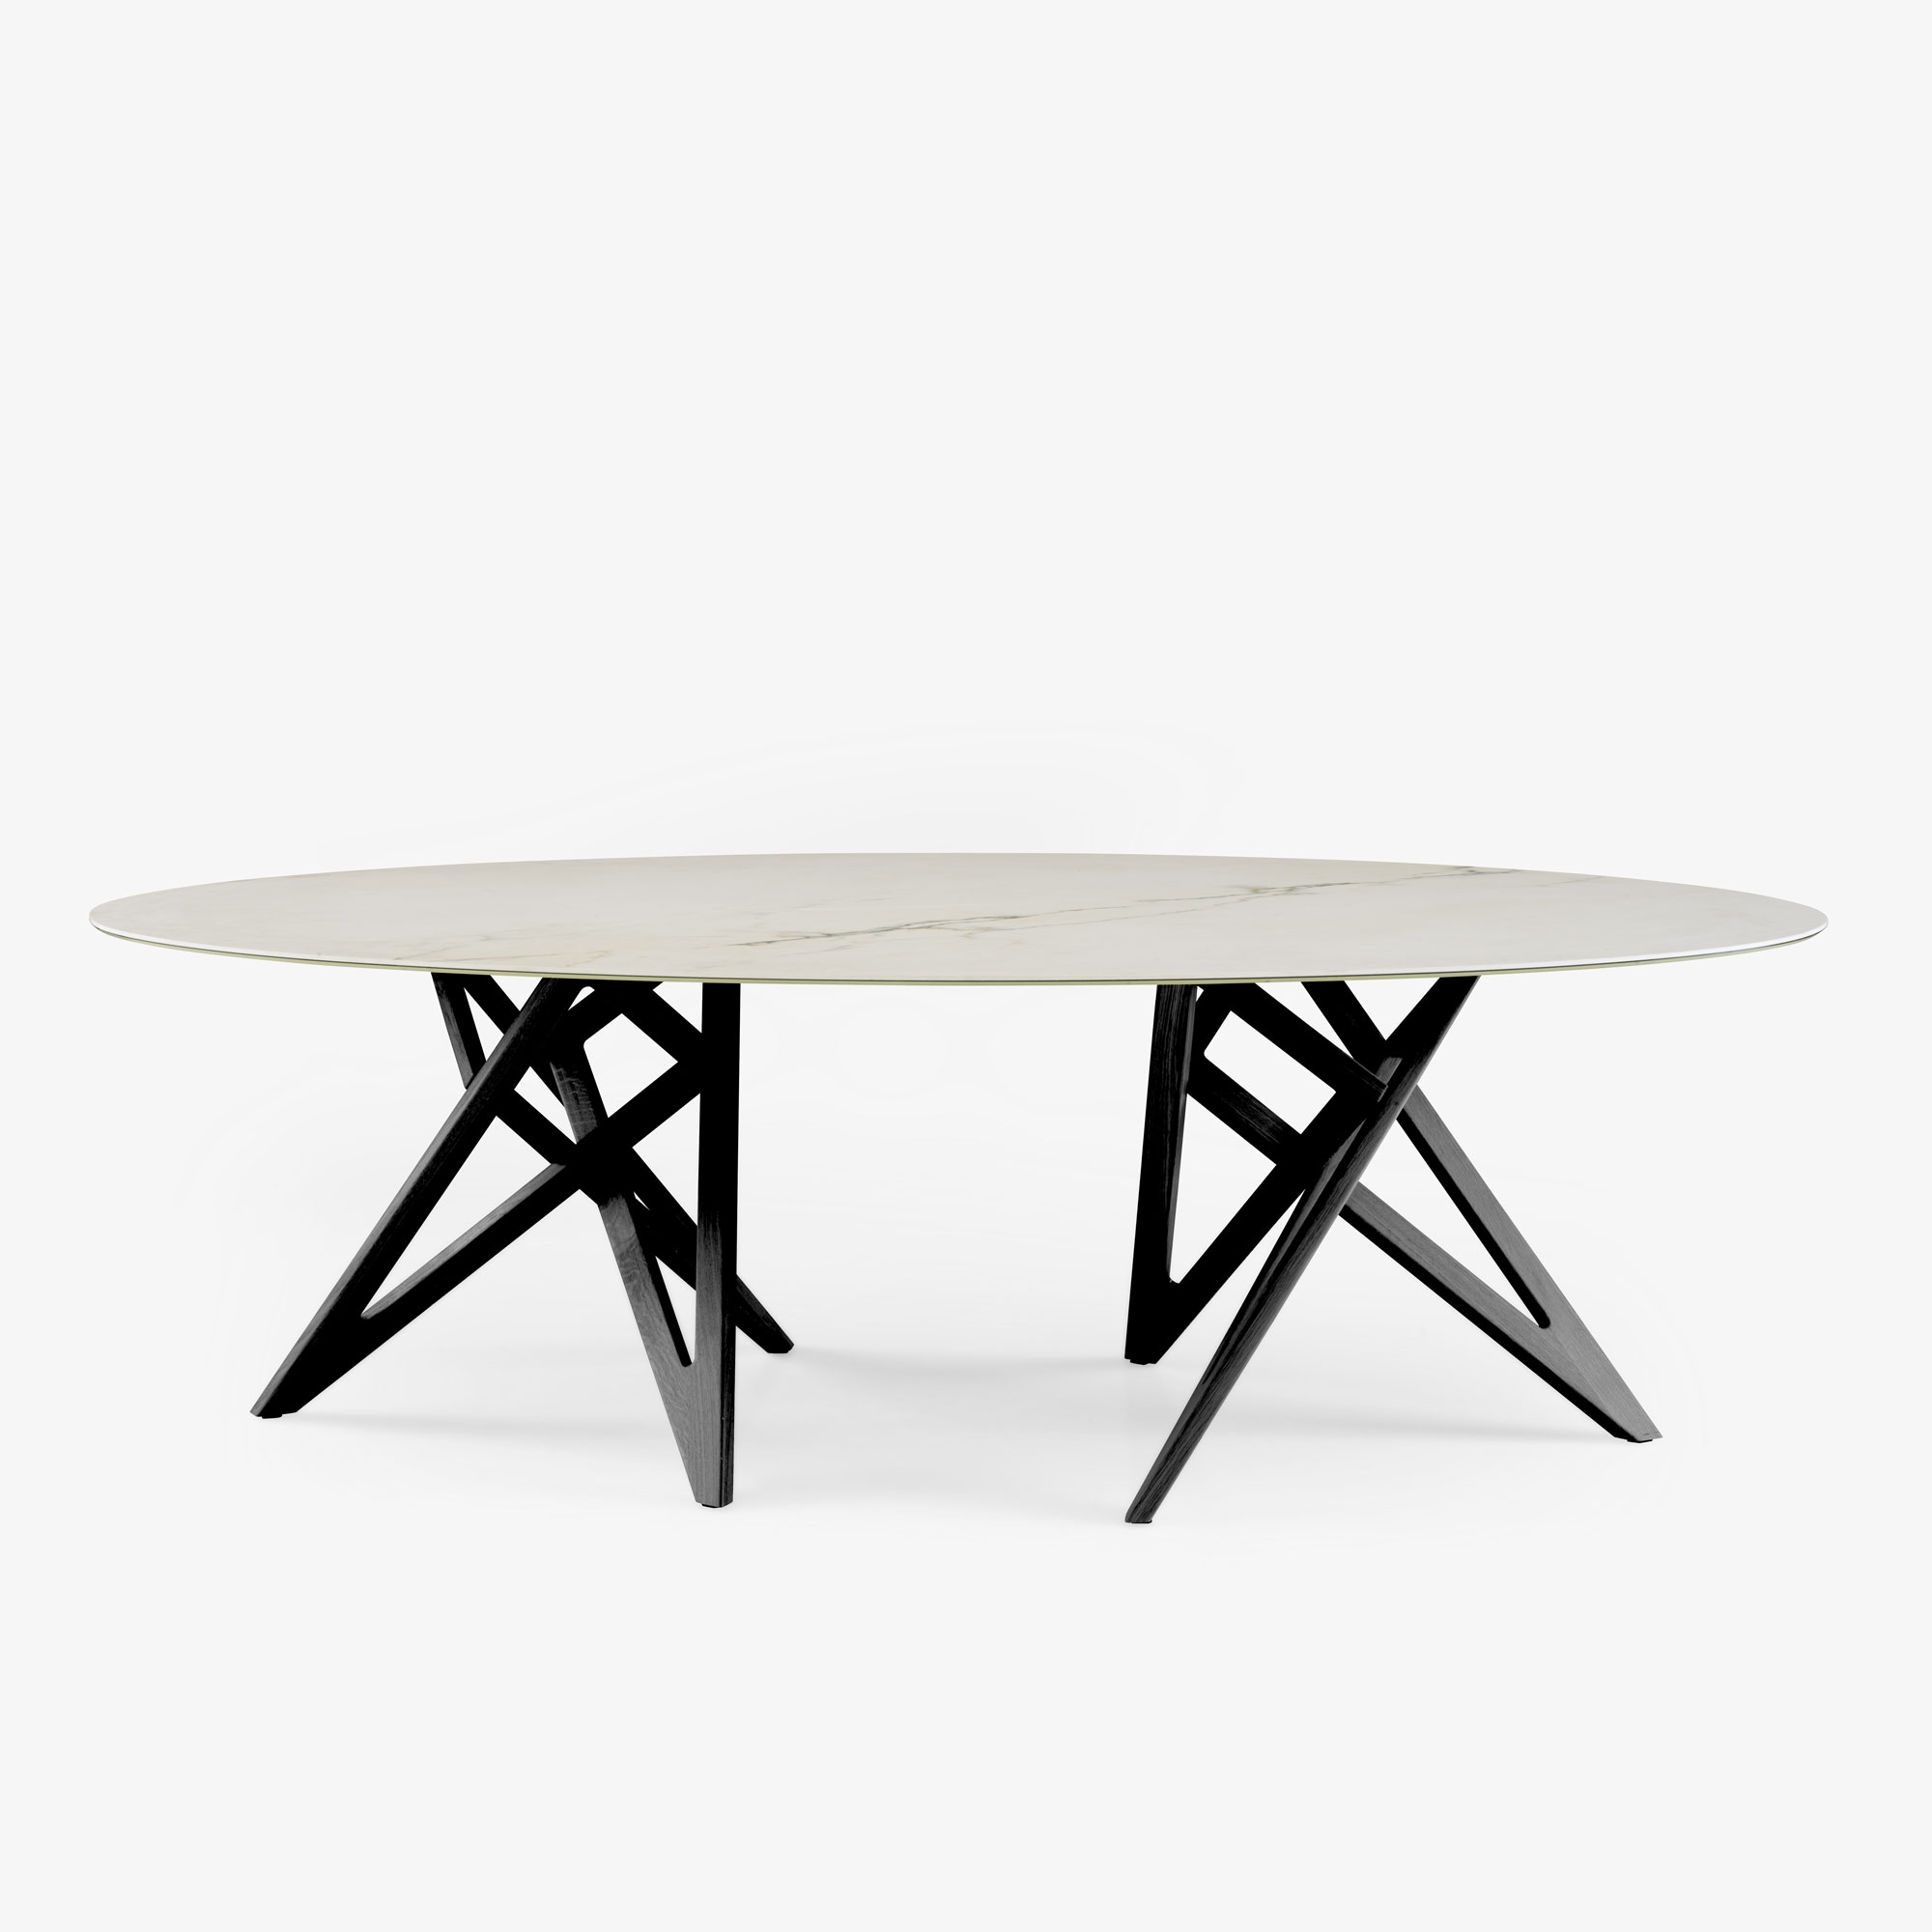 Image OVAL DINING TABLE BASE IN BLACK STAINED ASH 